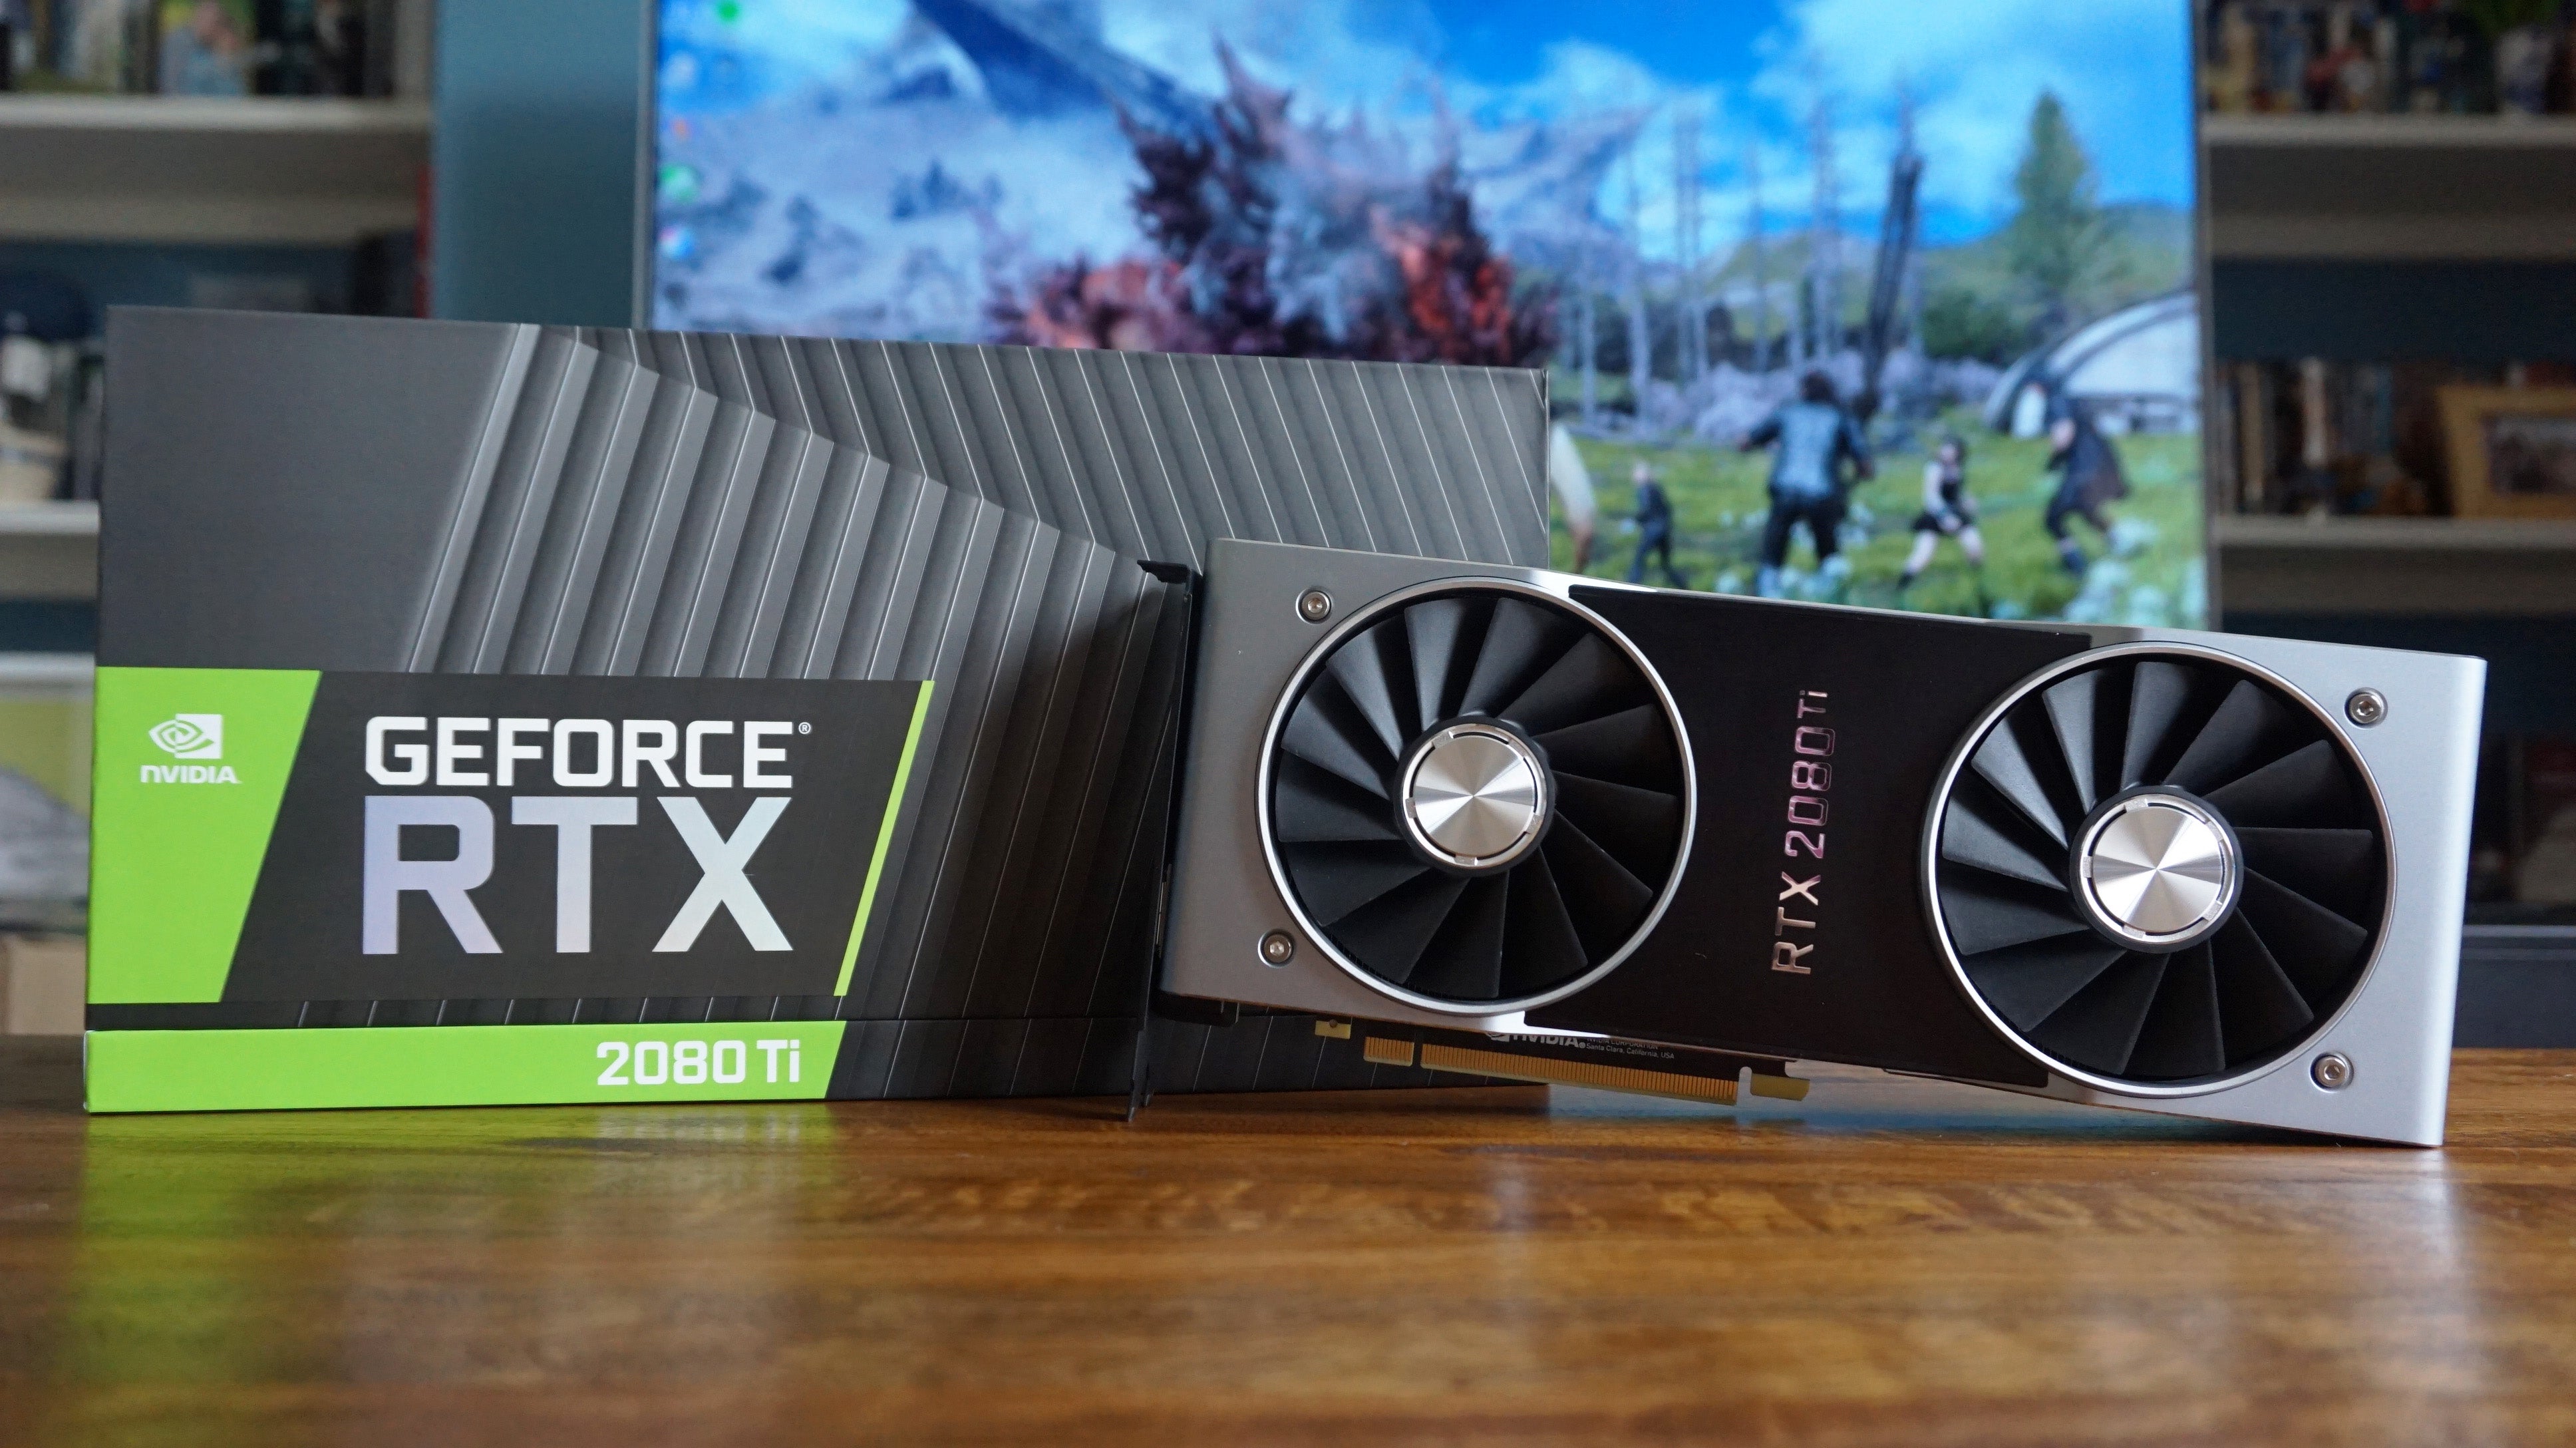 Image for Nvidia GeForce RTX 2080Ti review: A true 4K monster card